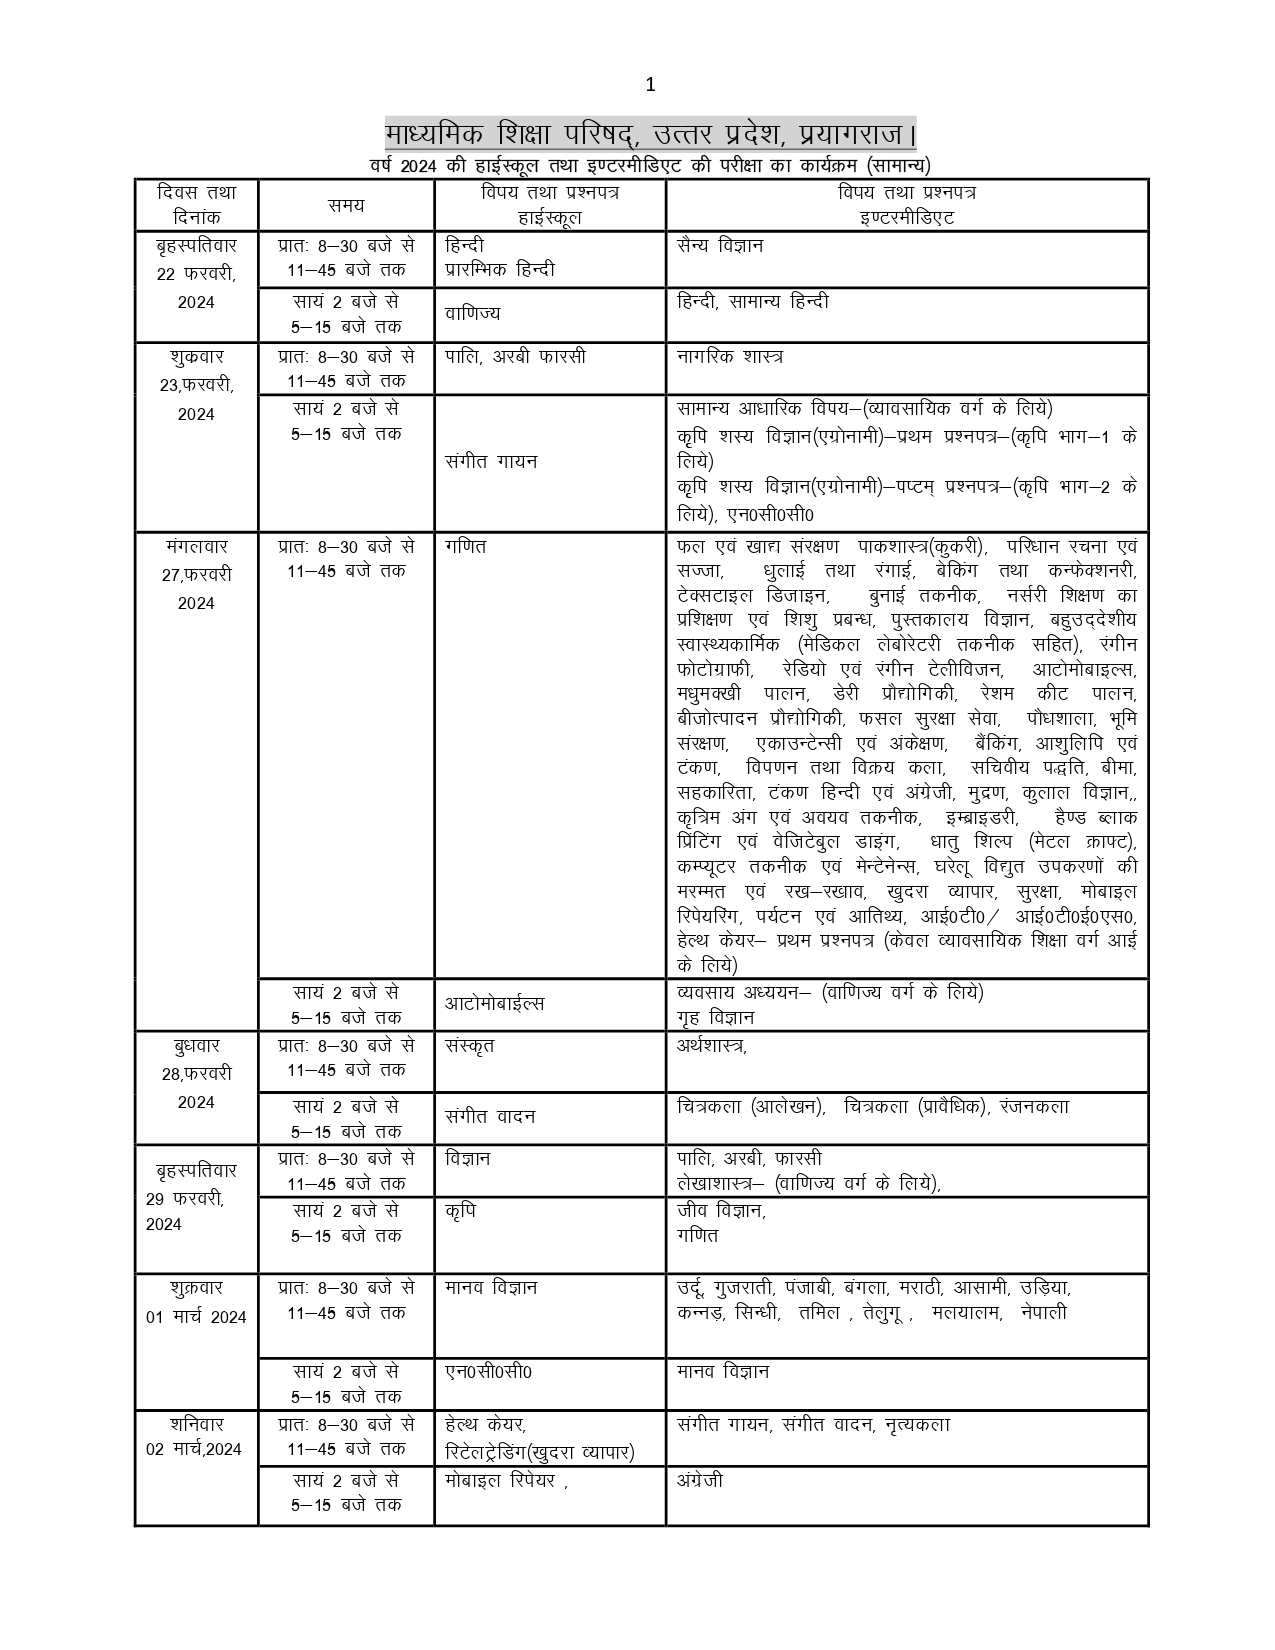 UP Board Class 10th 12th Time Table 2024